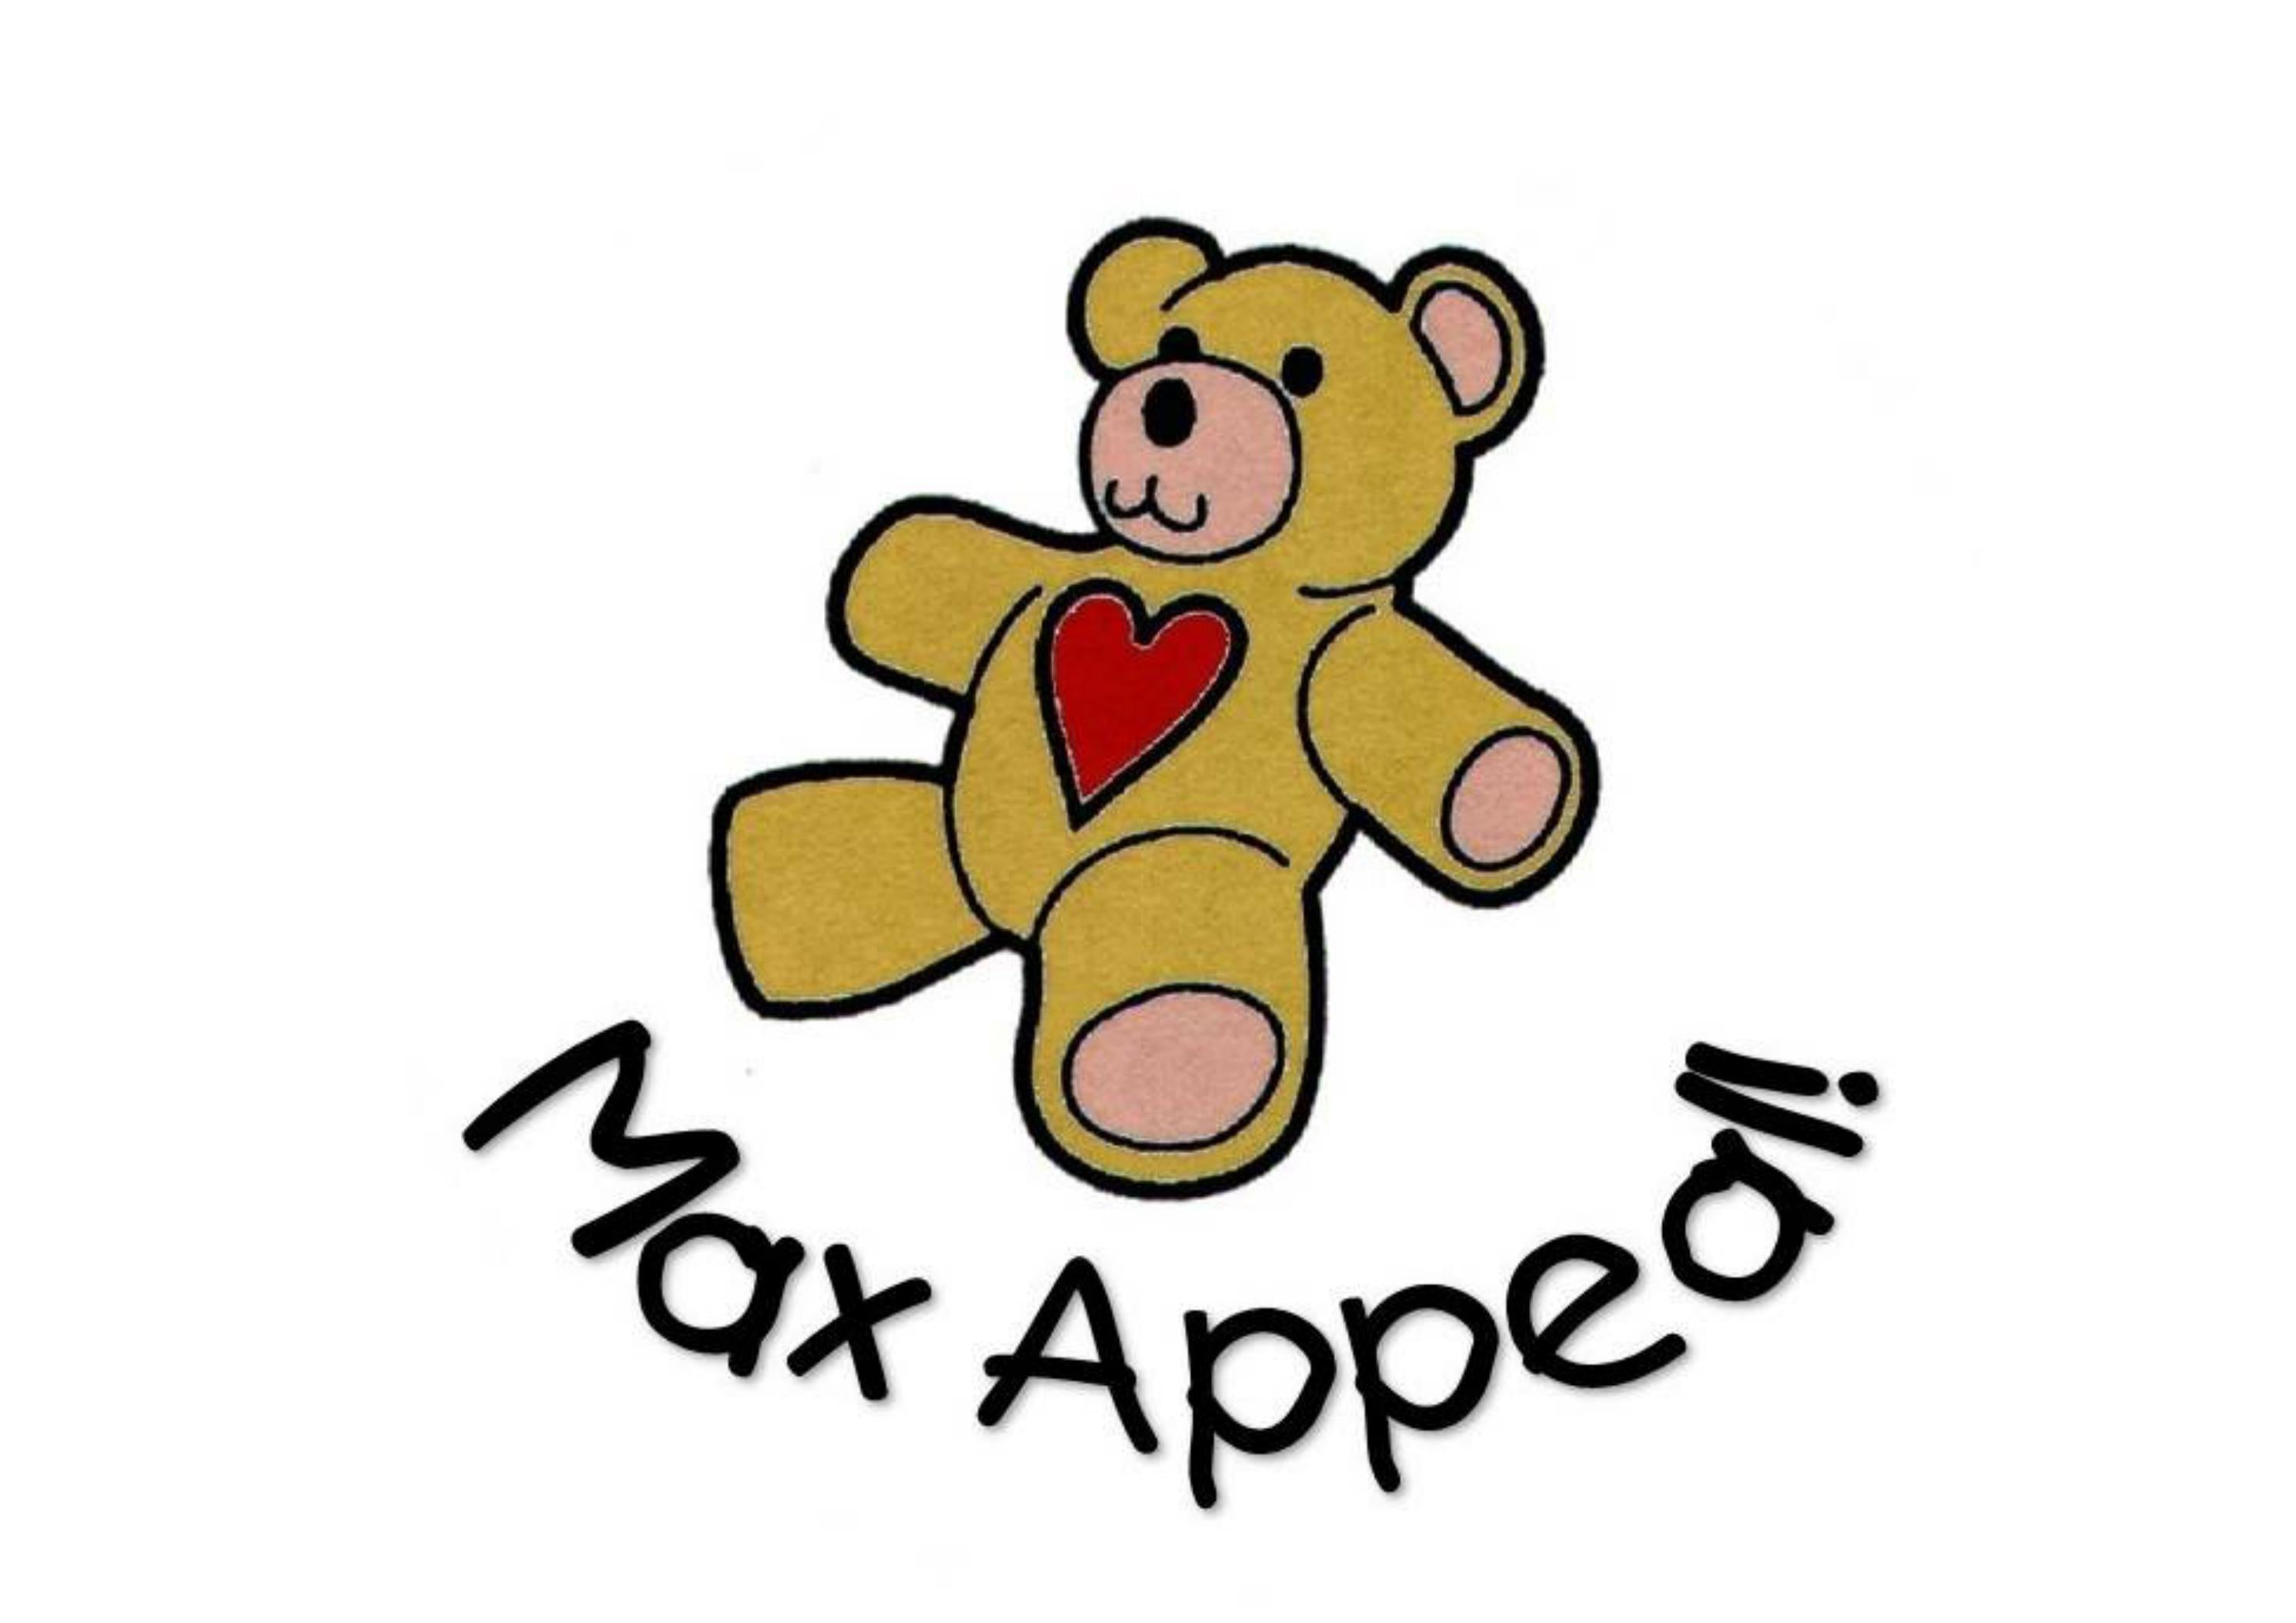 A4 printed cake topper with the Max Appeal teddy